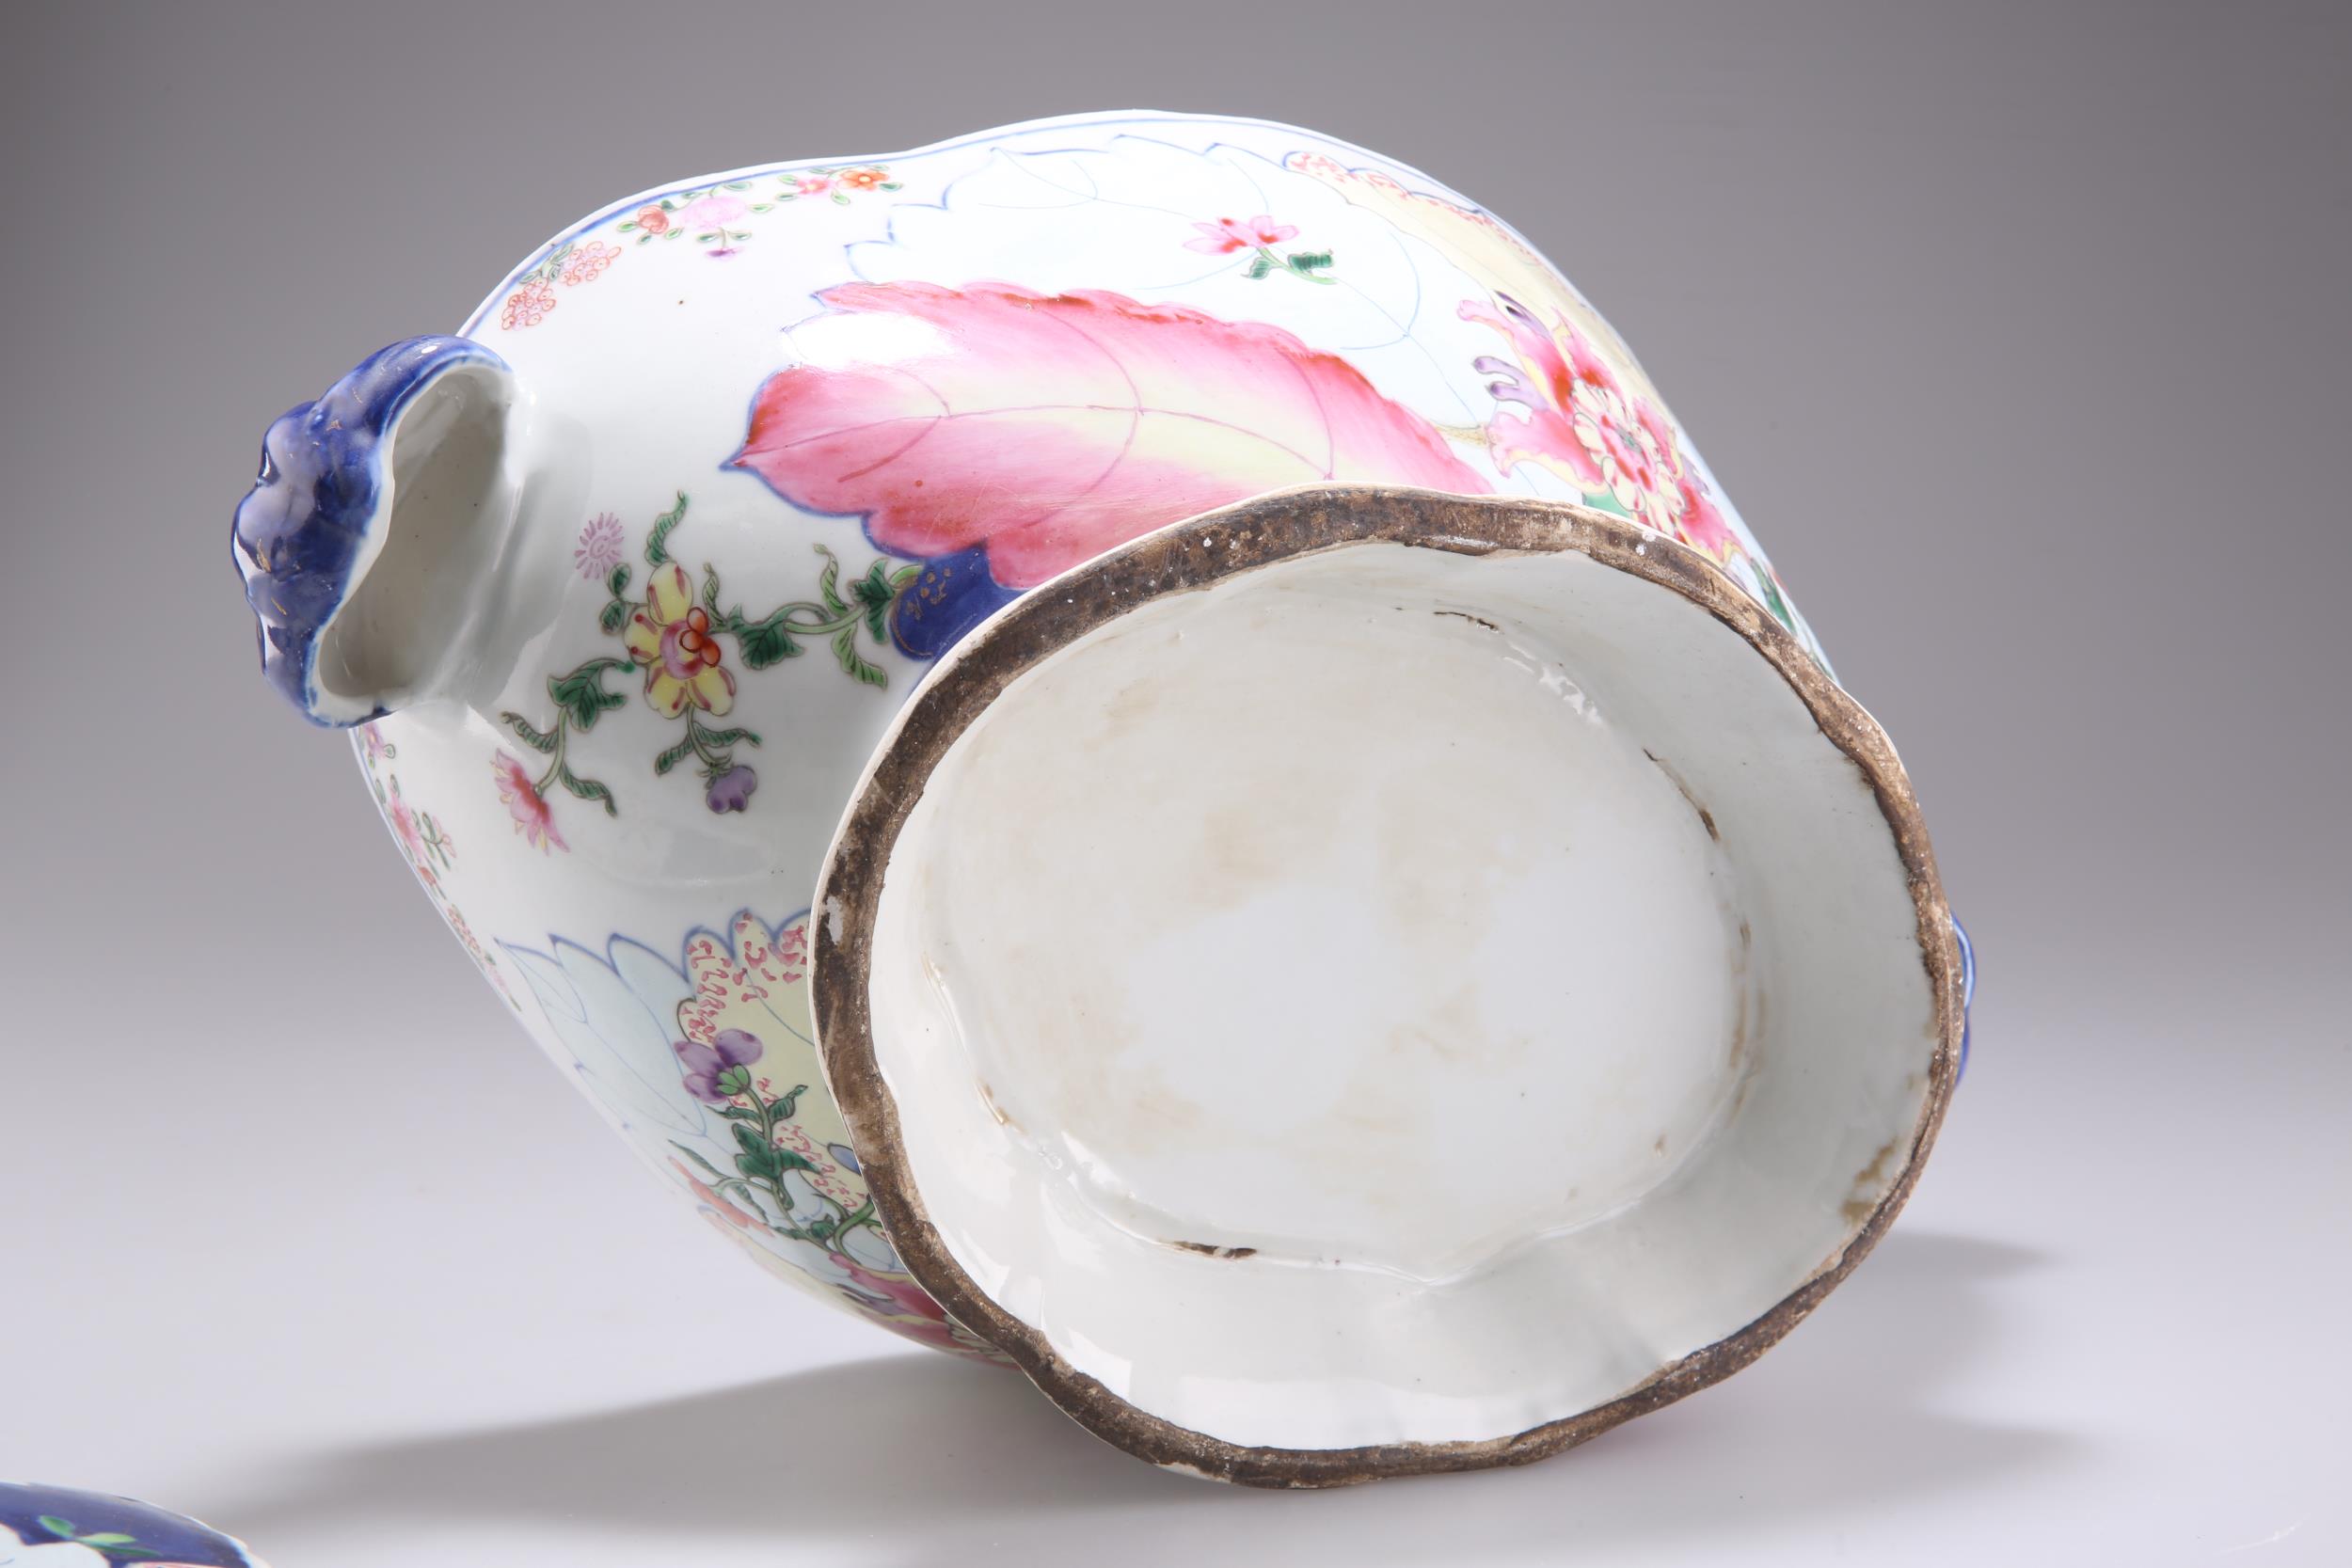 A TOBACCO LEAF TUREEN AND COVER, IN CHINESE EXPORT STYLE - Image 3 of 3